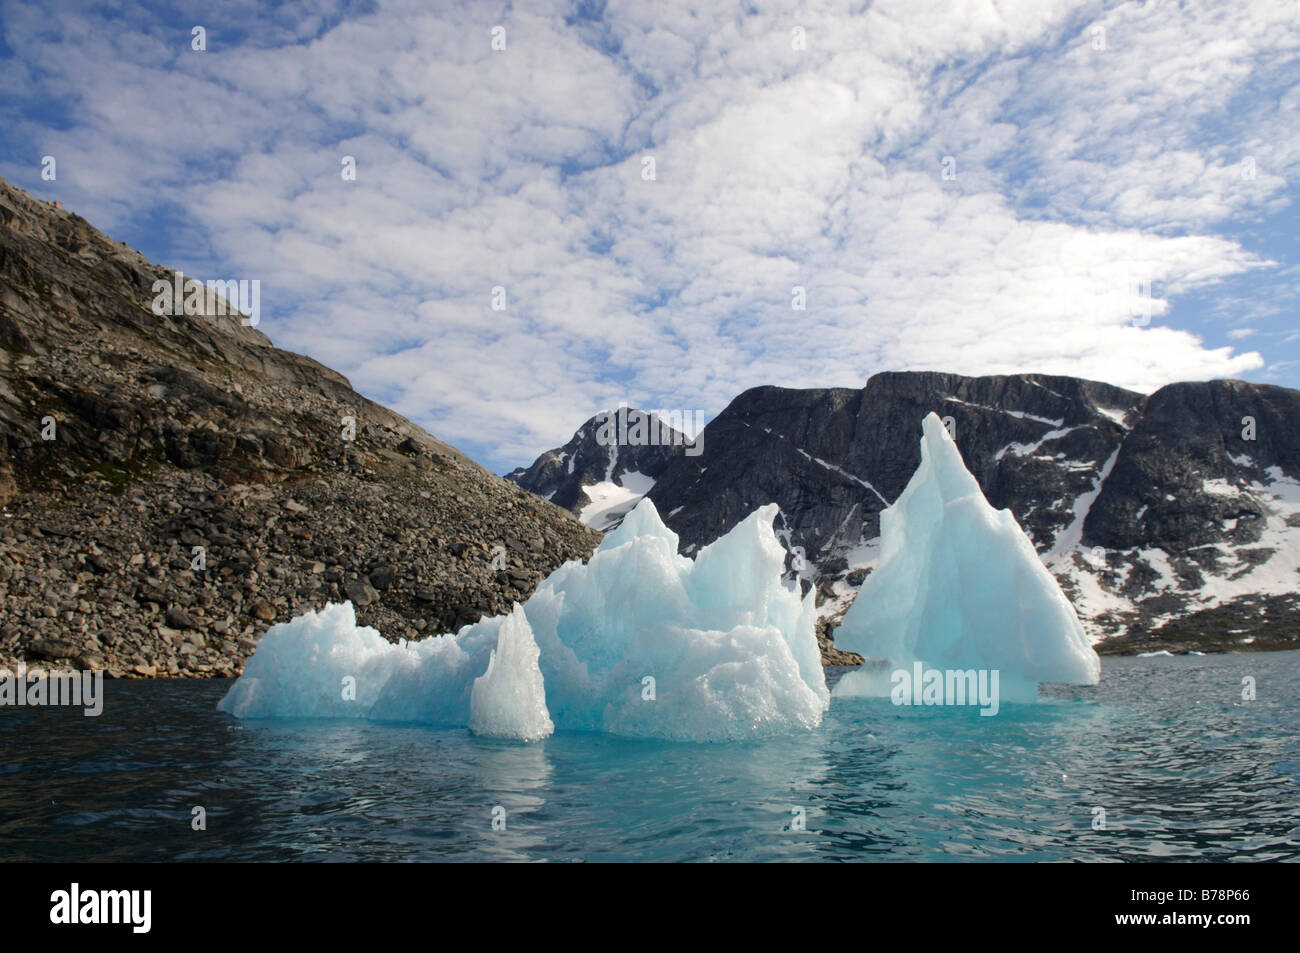 Icebergs in the Ikasartivaq-Fjord, East-Greenland, Greenland Stock Photo